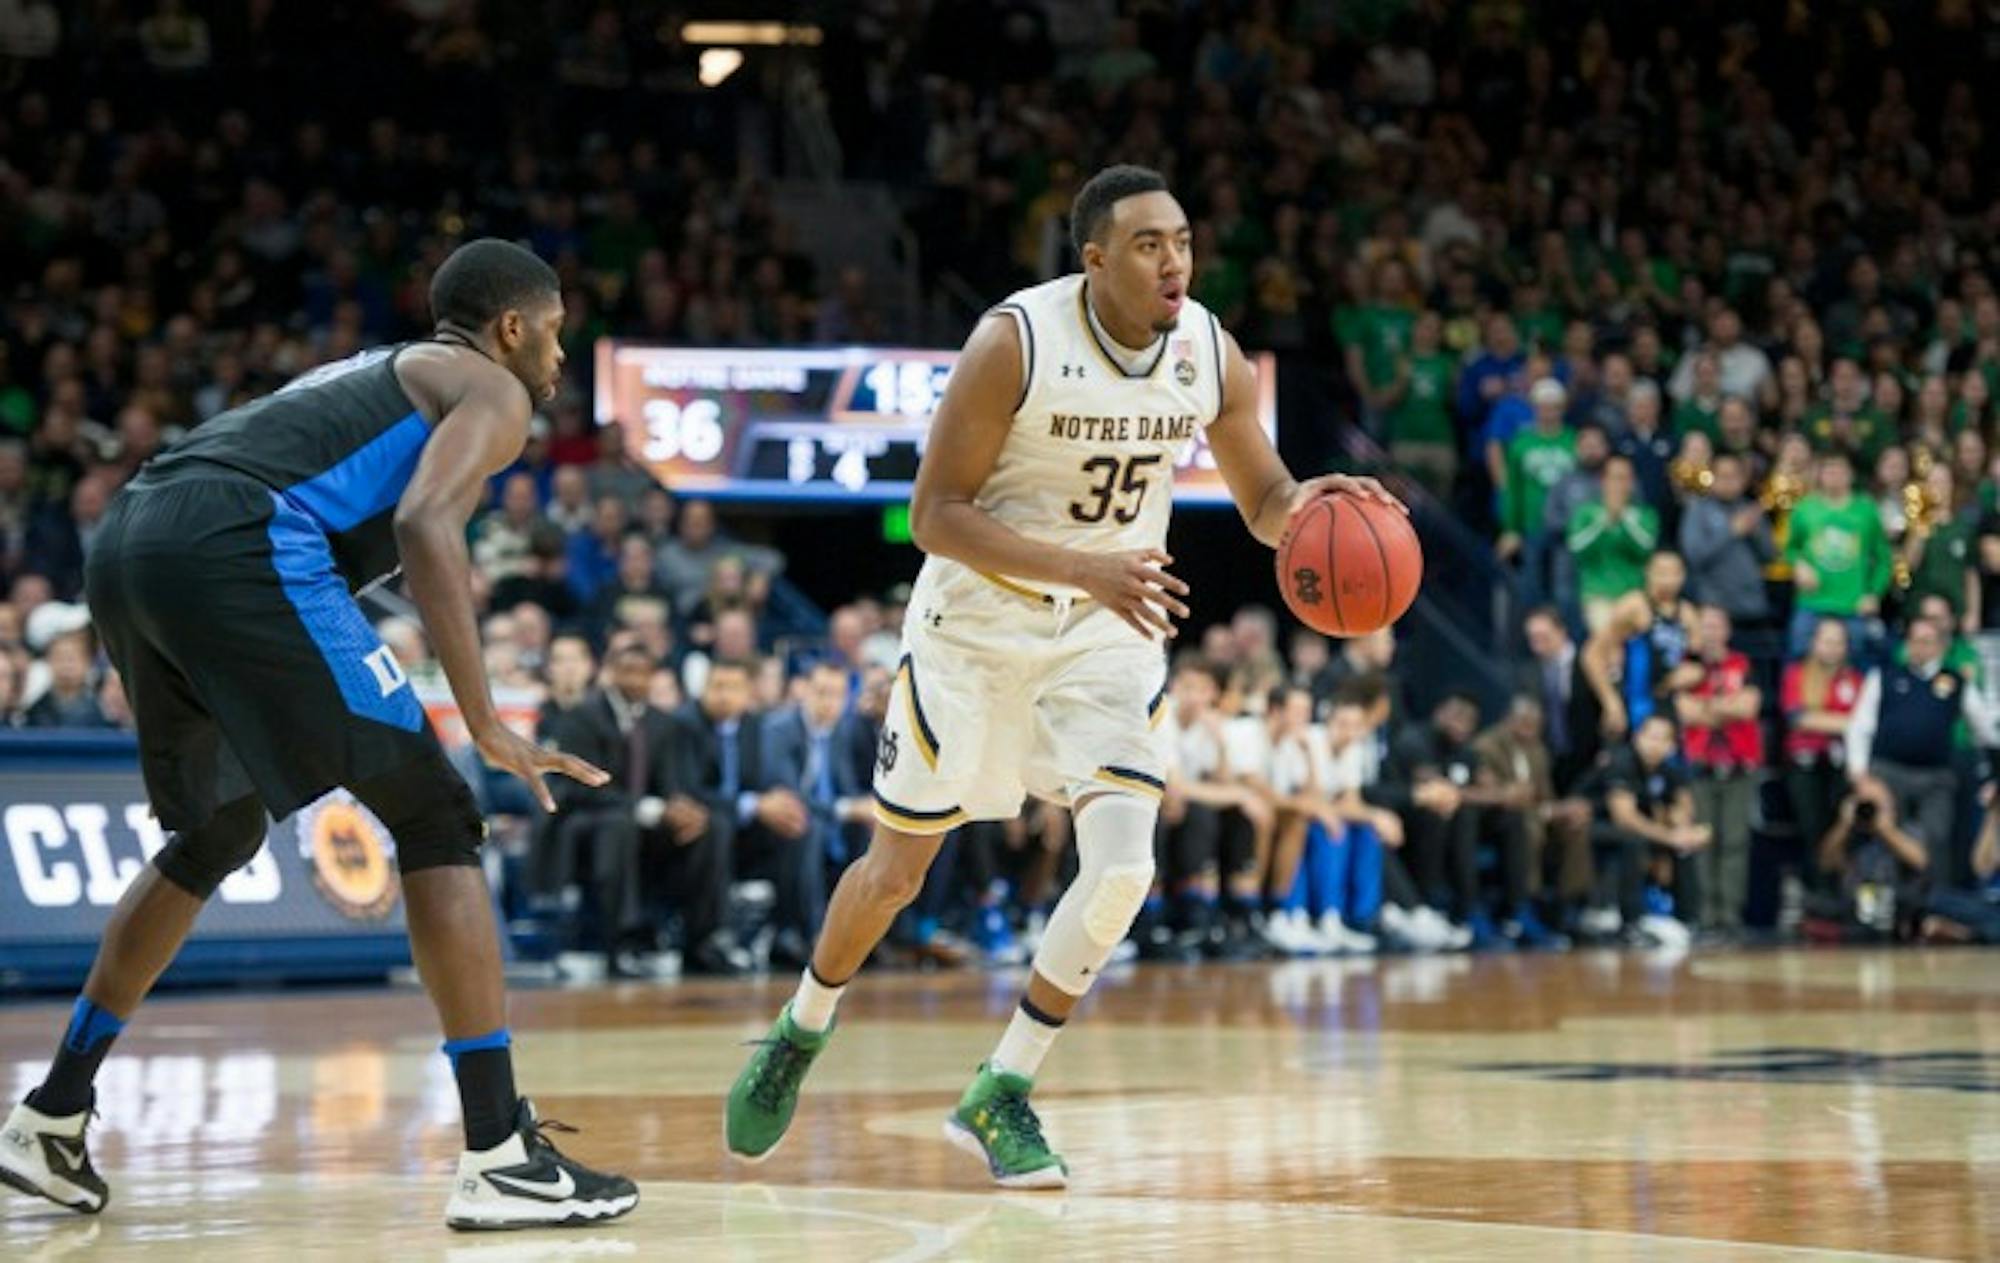 Irish junior forward Bonzie Colson dribbles around the 3-point line during Notre Dame’s 84-74 loss to the Blue Devils on Monday at Purcell Pavilion. Colson picked up 17 points and nine rebounds in the game.